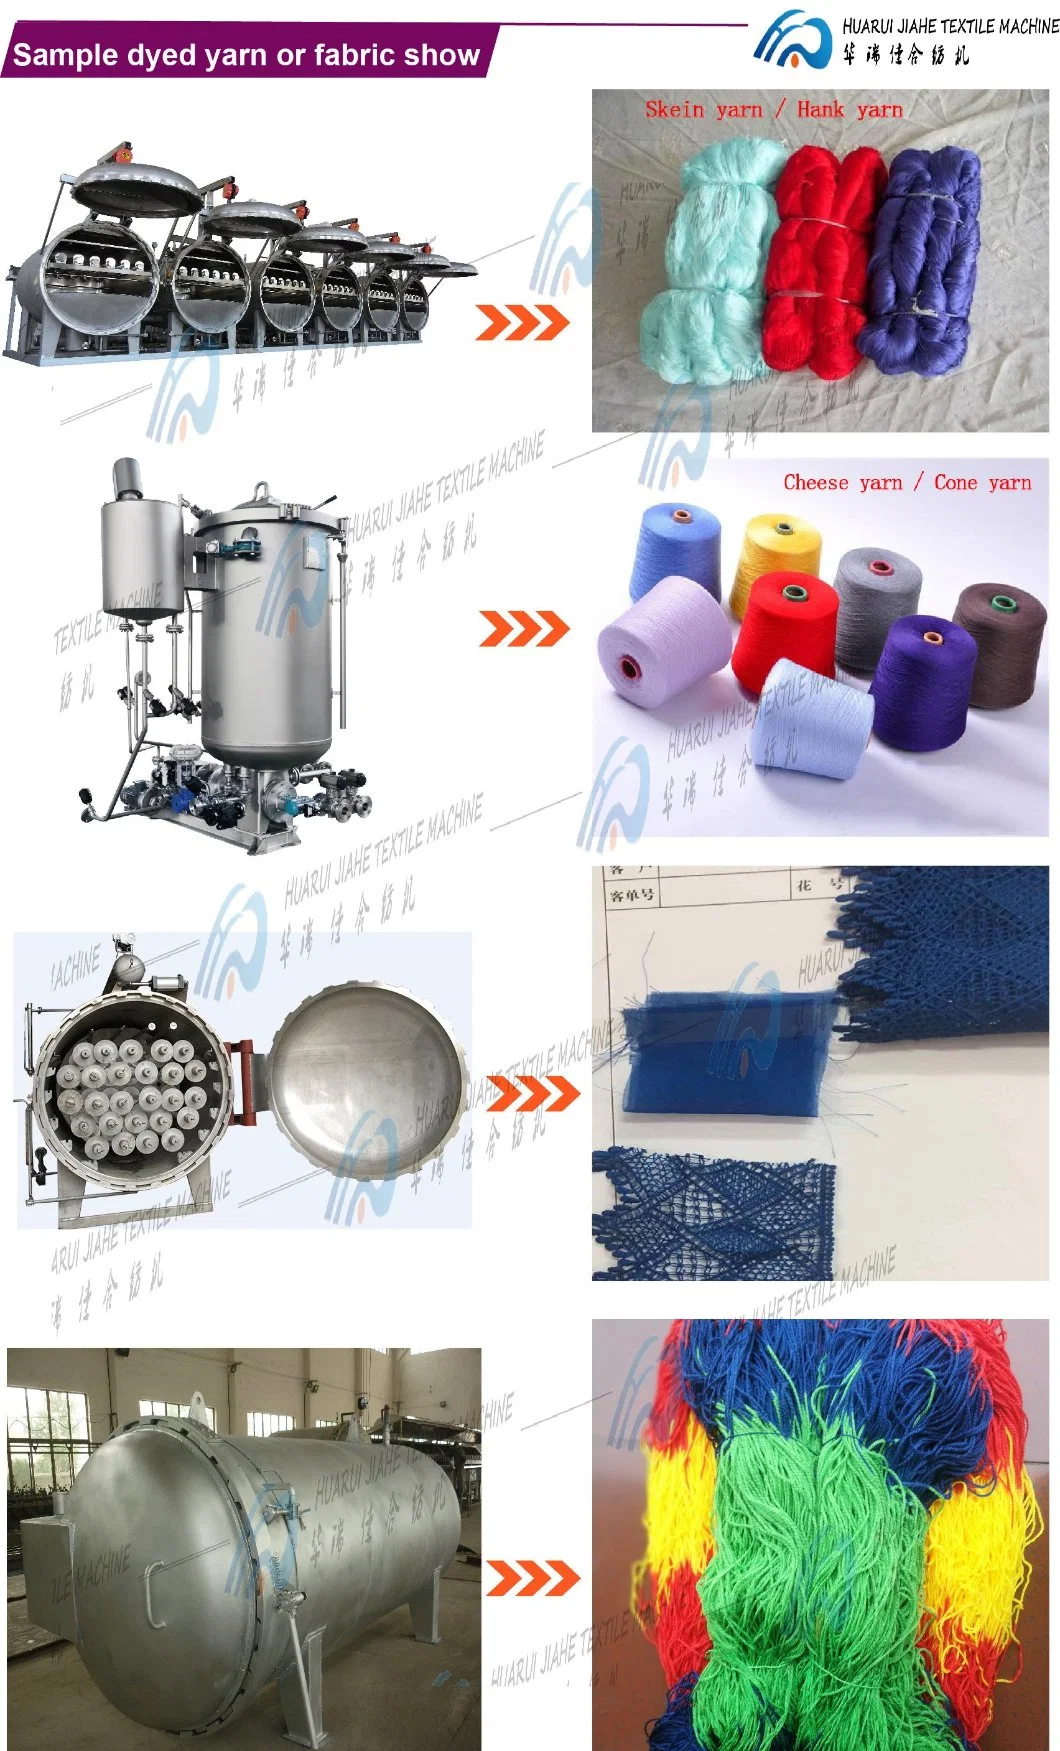 High Pressure Jigger Dyeing Machine Meet The Requirement of Small Batches and Different Kinds Fabric, Dyeing Machinery Equipment Used Refurbishment